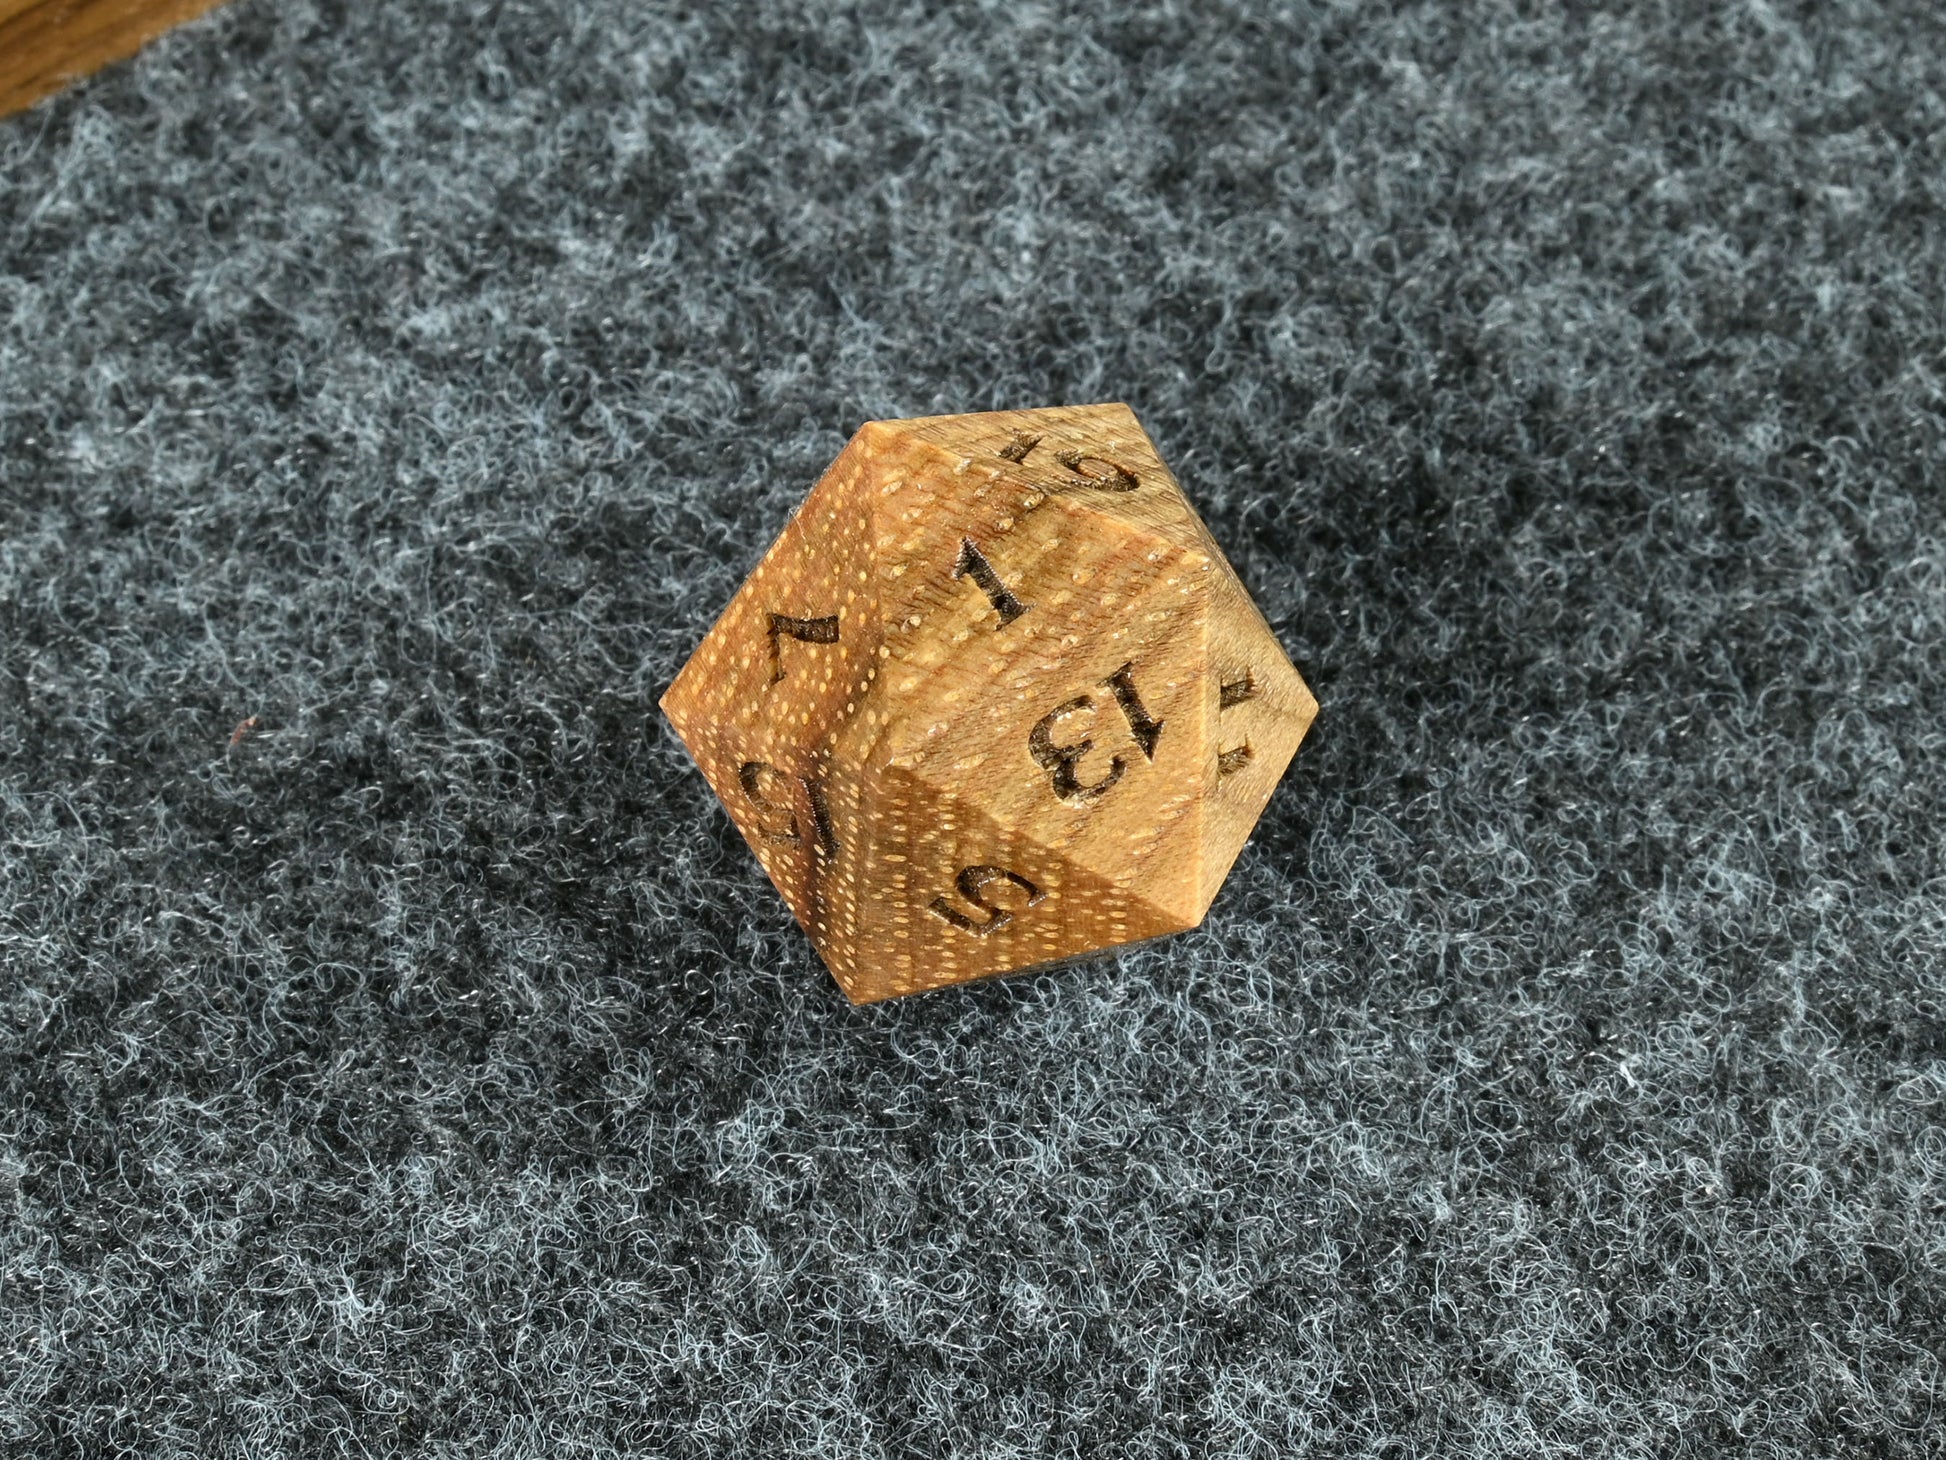 Hickory wood D20 for dnd rpg